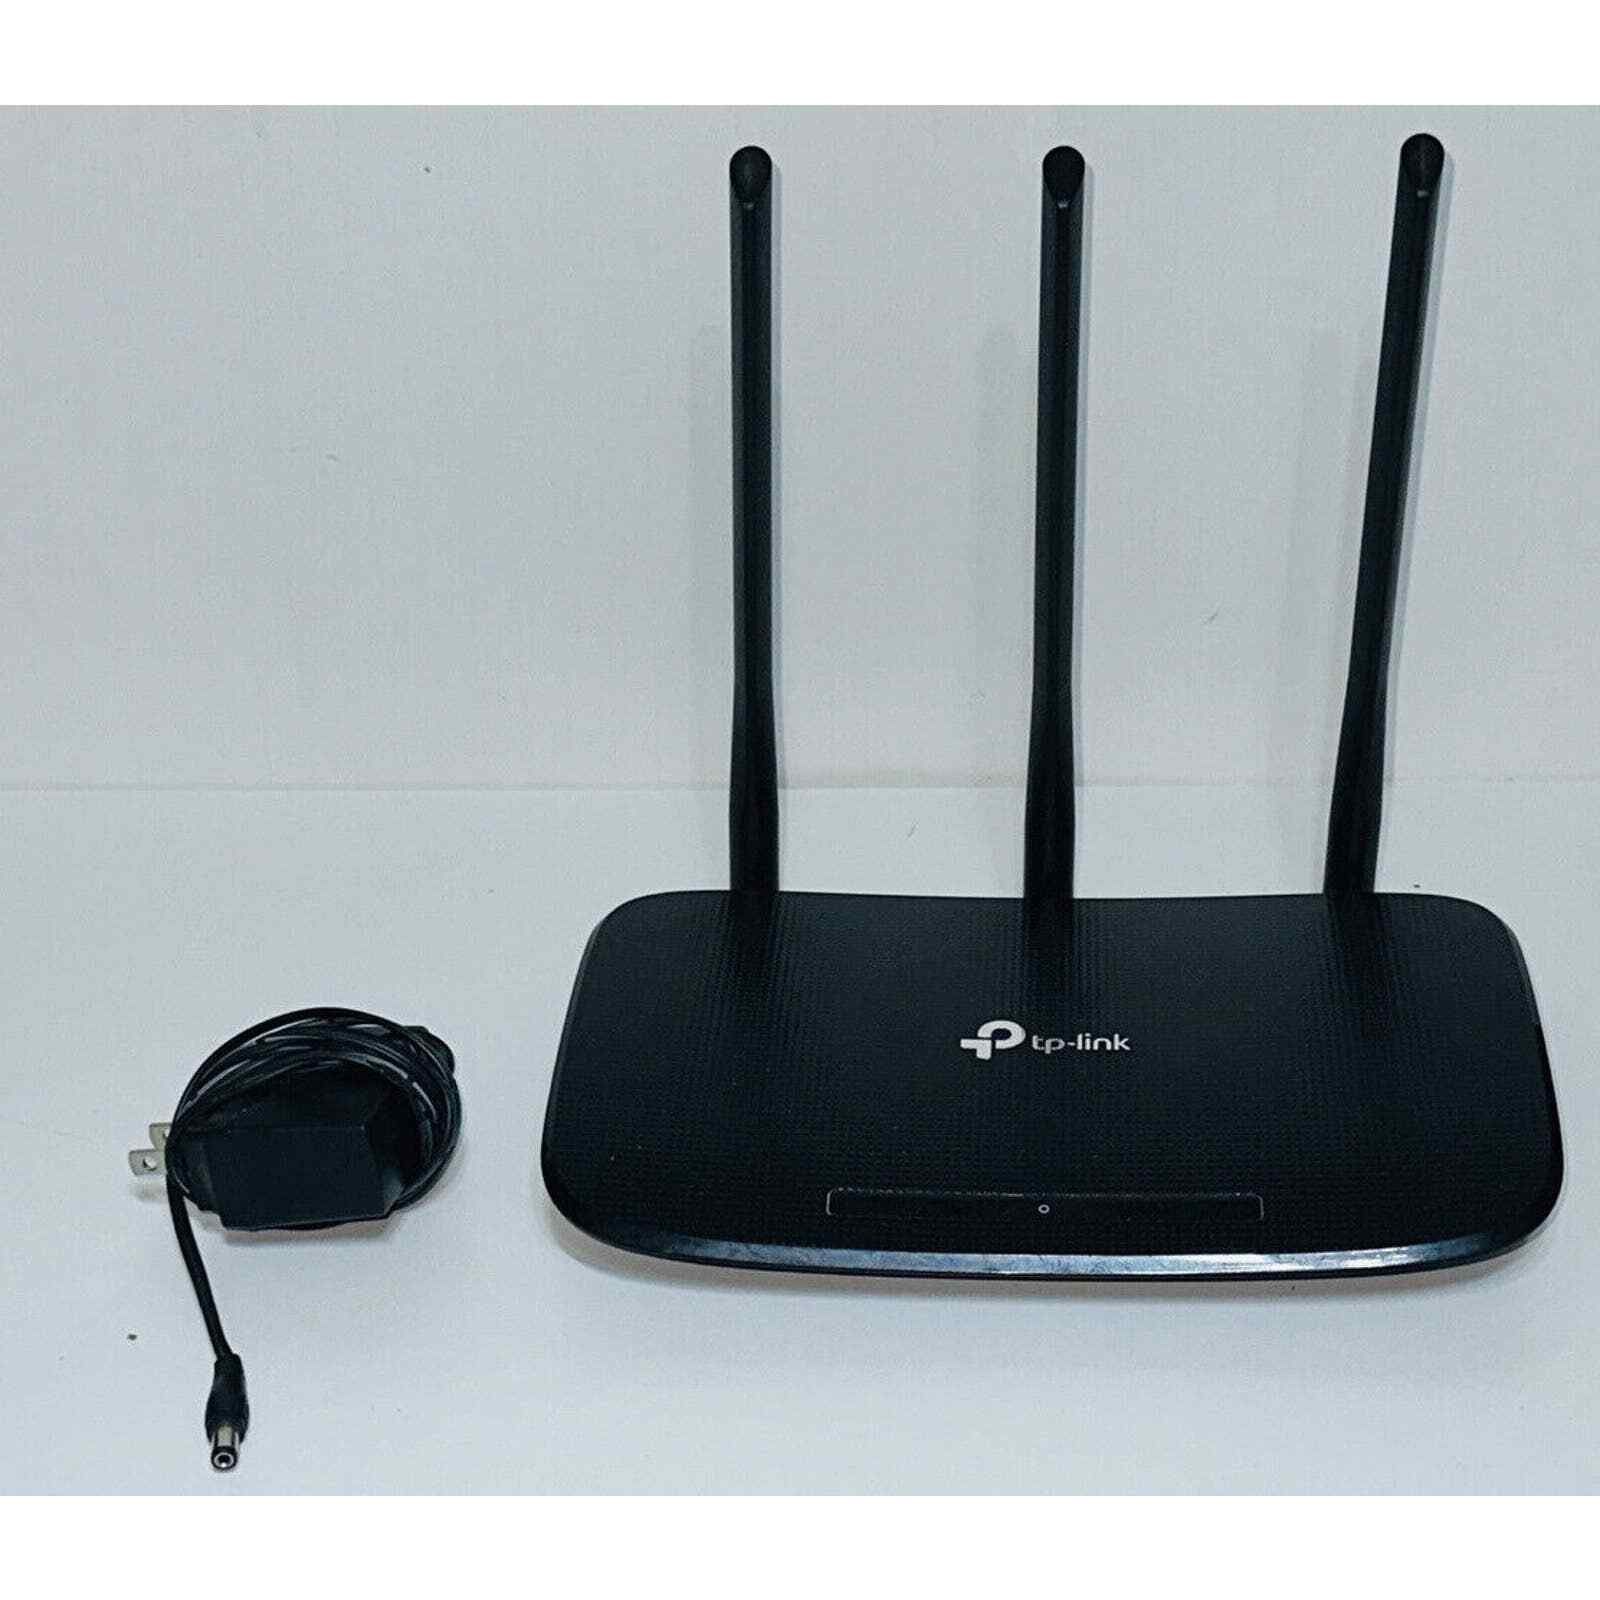 TP-LINK TL-WR940N 450Mbps Wireless N Router With power cable Internet Tested